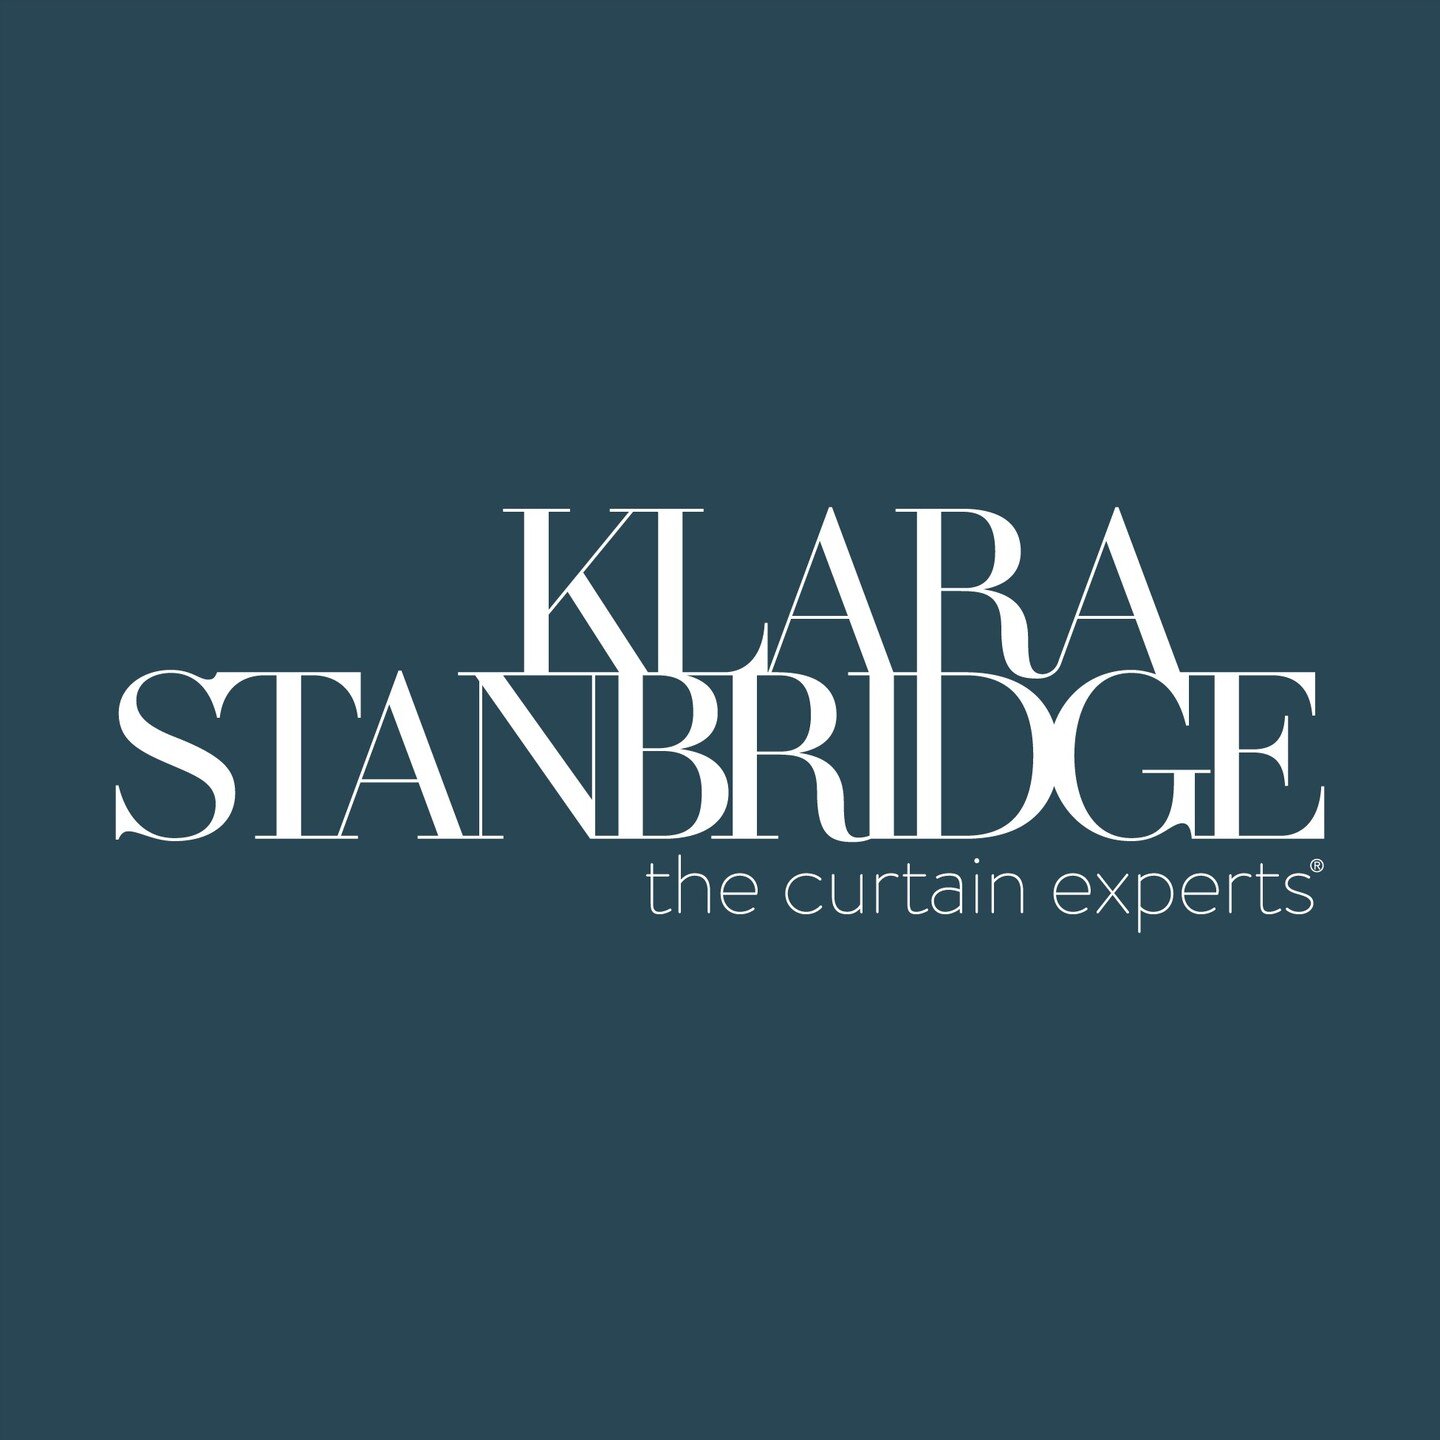 We have just completed the re-branding of Klara Standrige / The Curtain Expert&reg;. New logo design, website, photography and video creation. https://www.klarastanbridge.com #logodesigner #logodesign #websitedesign #photography #videocreation #graph